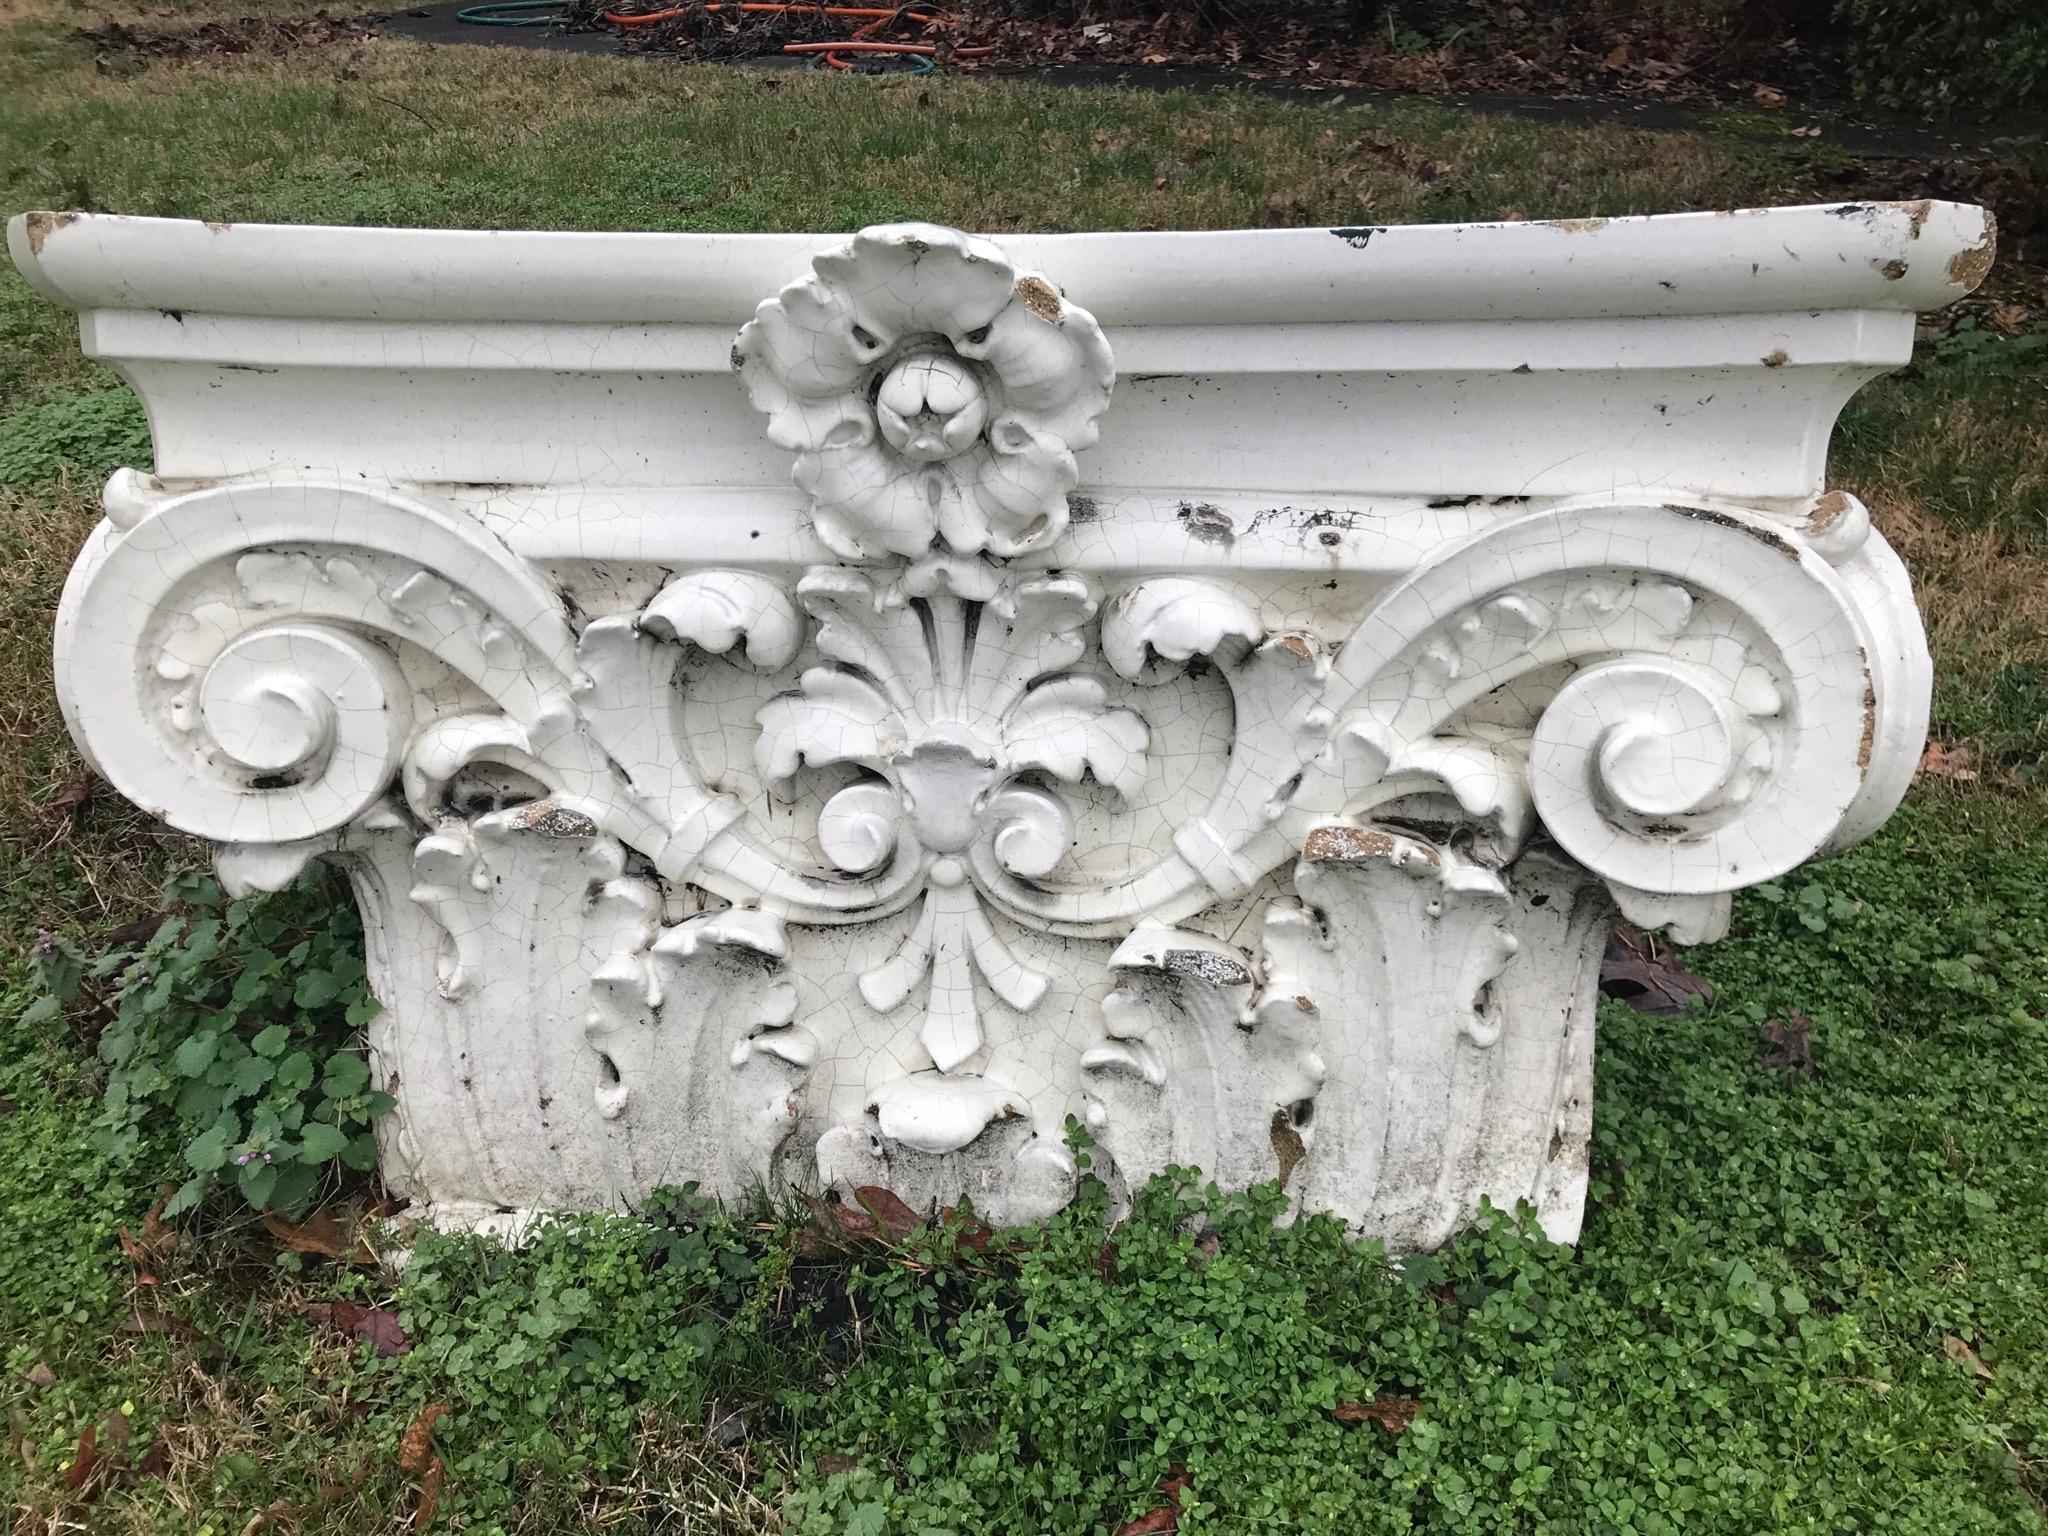 Highly decorative and survives outdoor elements .Obvious wear with chips, nicks, dings and losses throughout. Outdoor architectural element, off building. Fired terracotta.

Stable condition with over century of wear and weathering. Distressed as